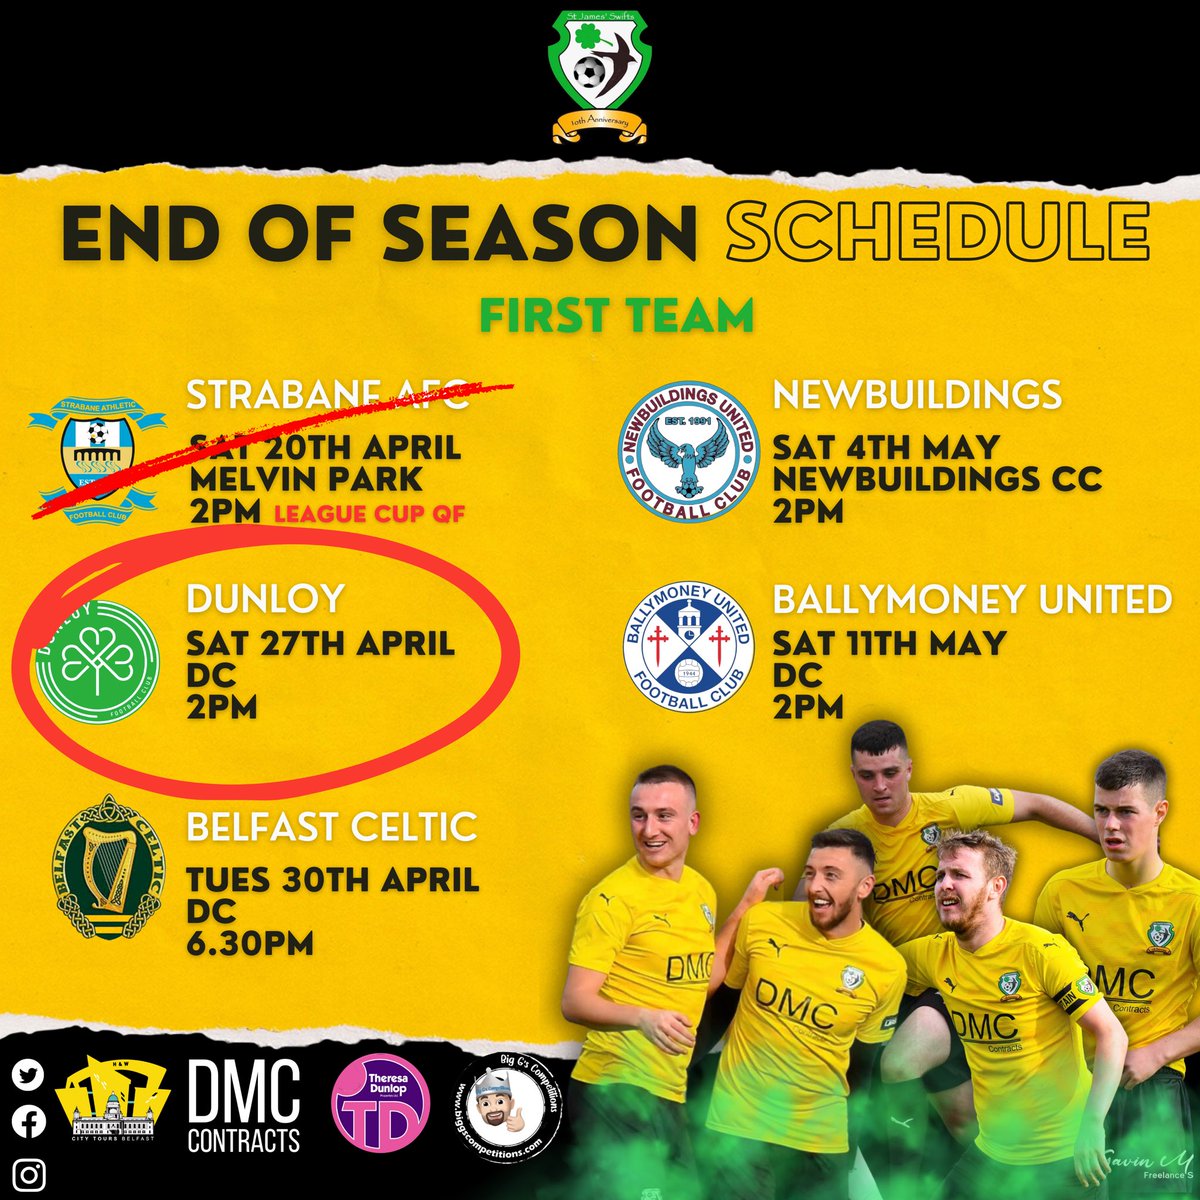 𝙐𝙋 𝙉𝙀𝙓𝙏… We welcome Dunloy FC to West Belfast this Saturday in the league 🍀 Let’s get up and support the boys #GOTS ⚫️🟡🍀 BIG G’s Competitions | City Tours Belfast | DMC Contracts Ltd. | Theresa Dunlop Mortgages